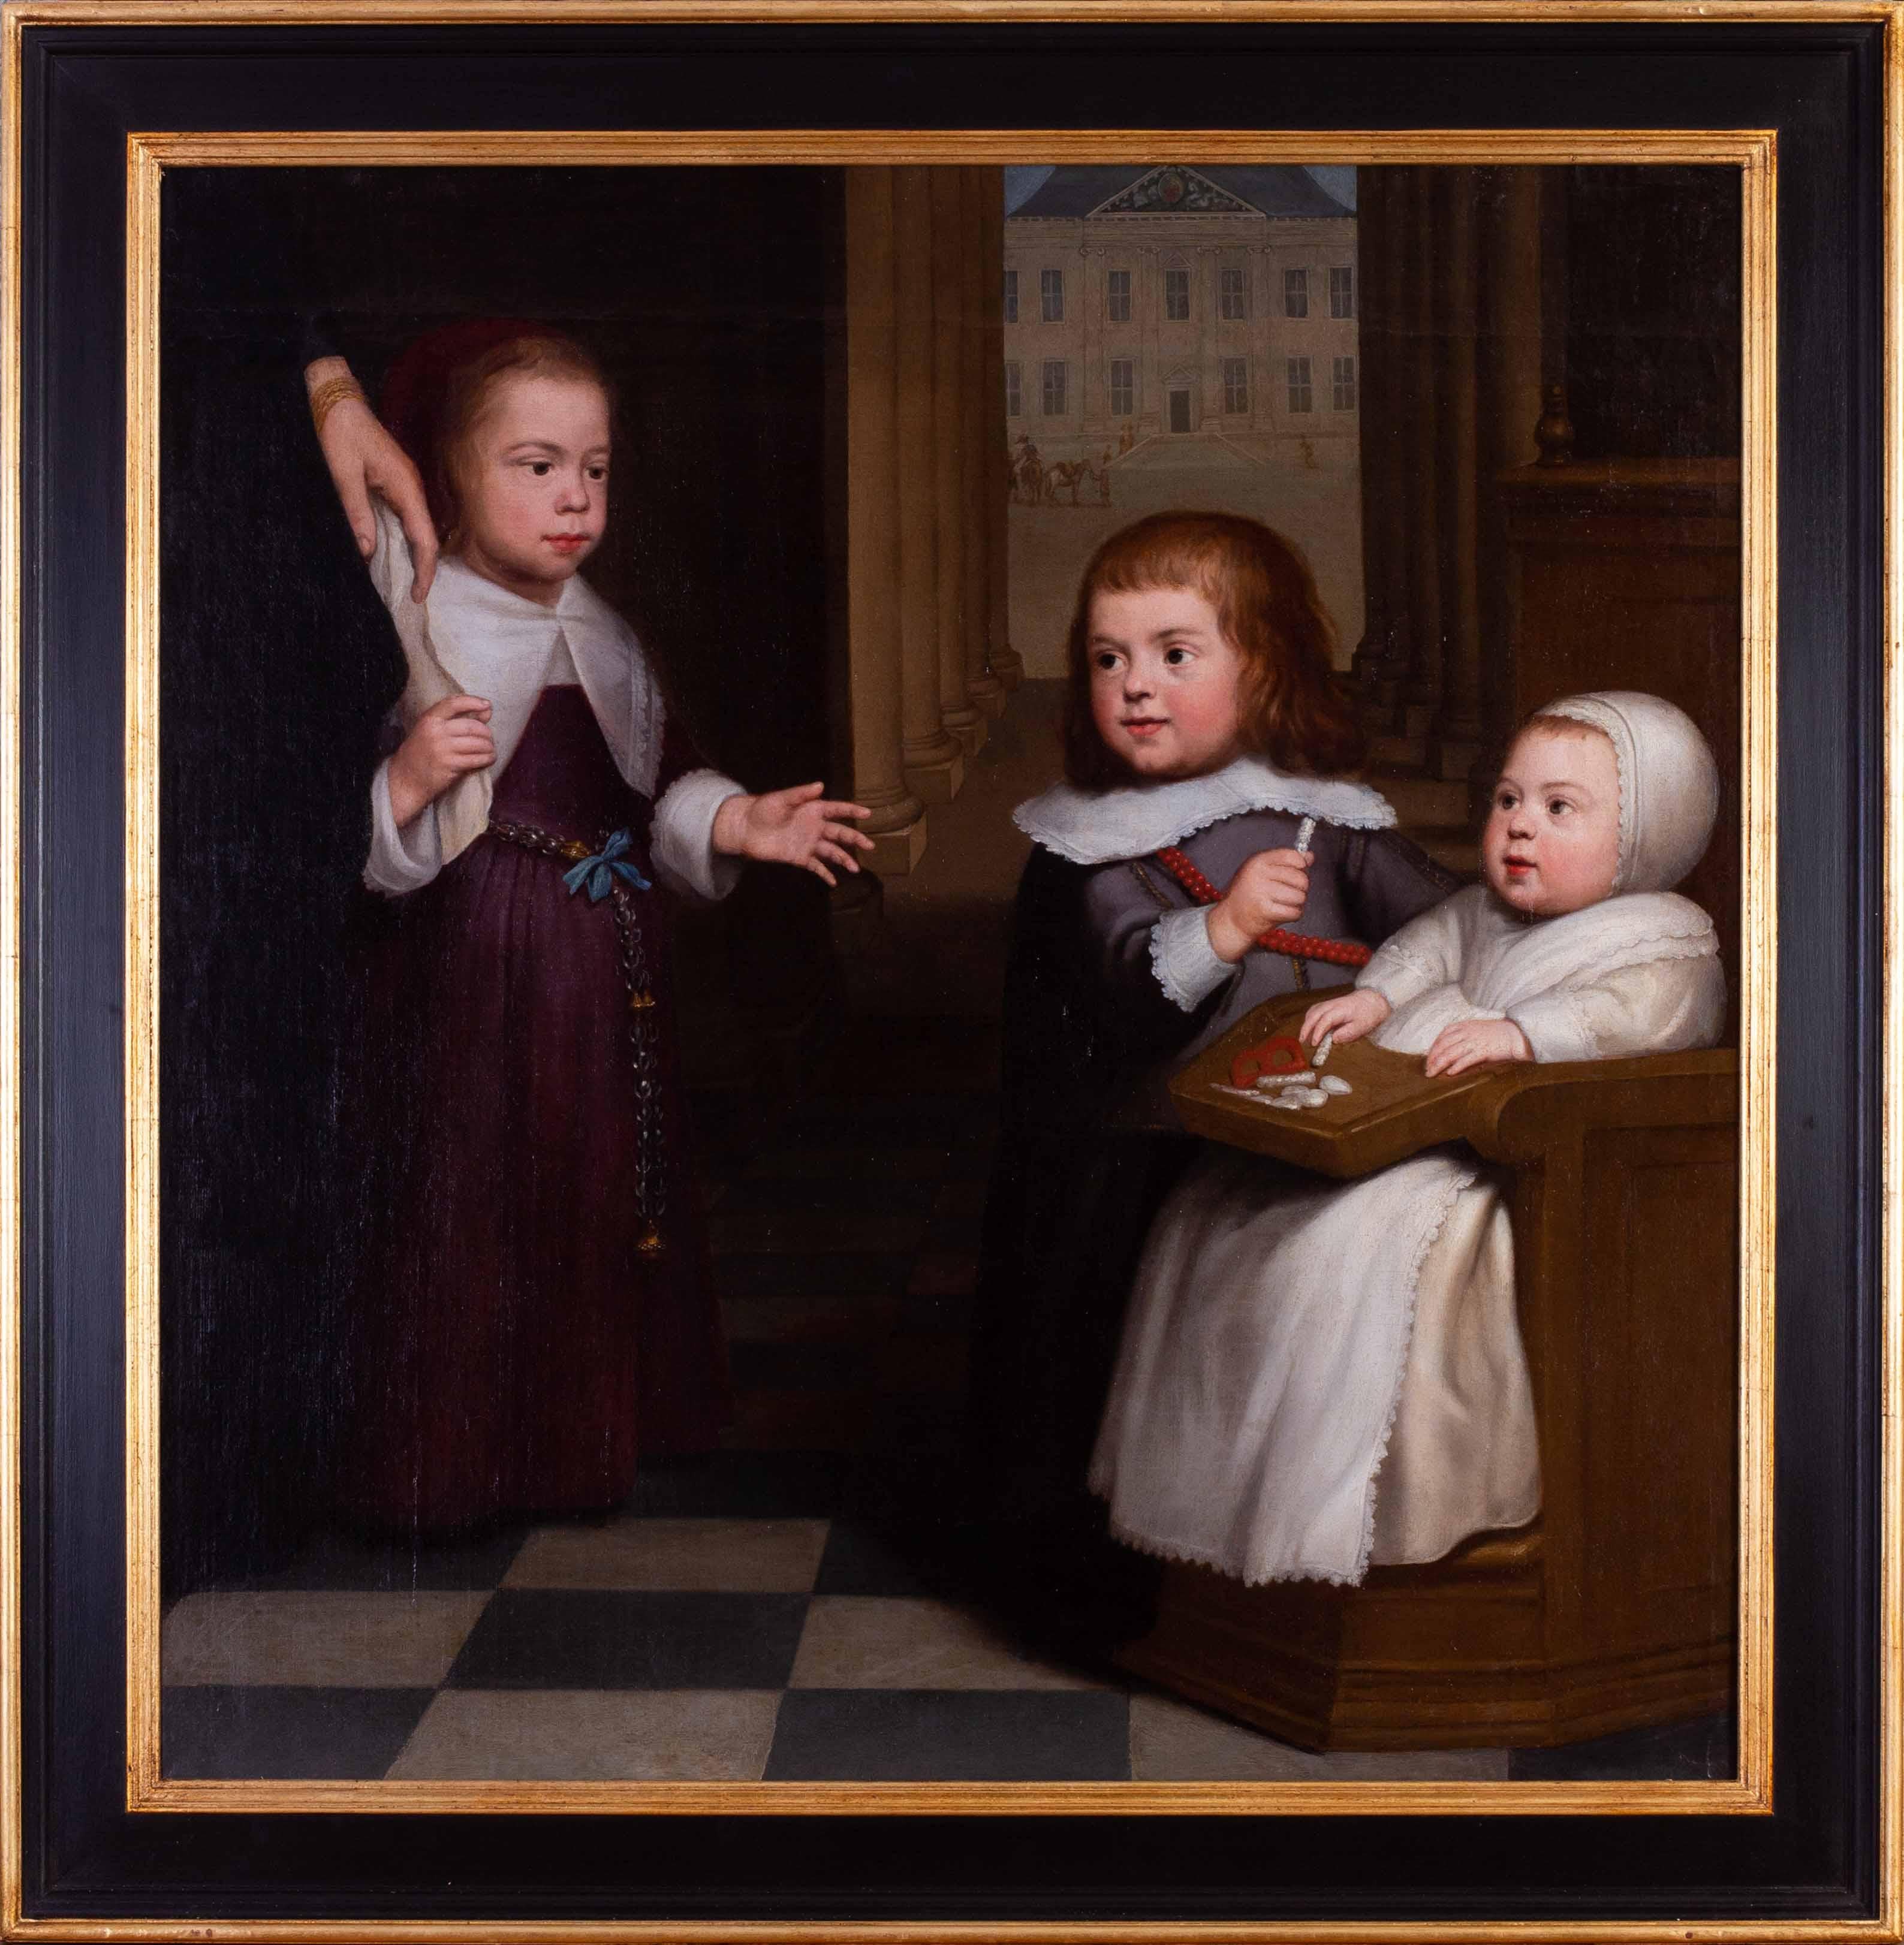 Jacob Geritsz Cuyp Figurative Painting - Dutch 17th Century Old Master painting of three young children aristocrats